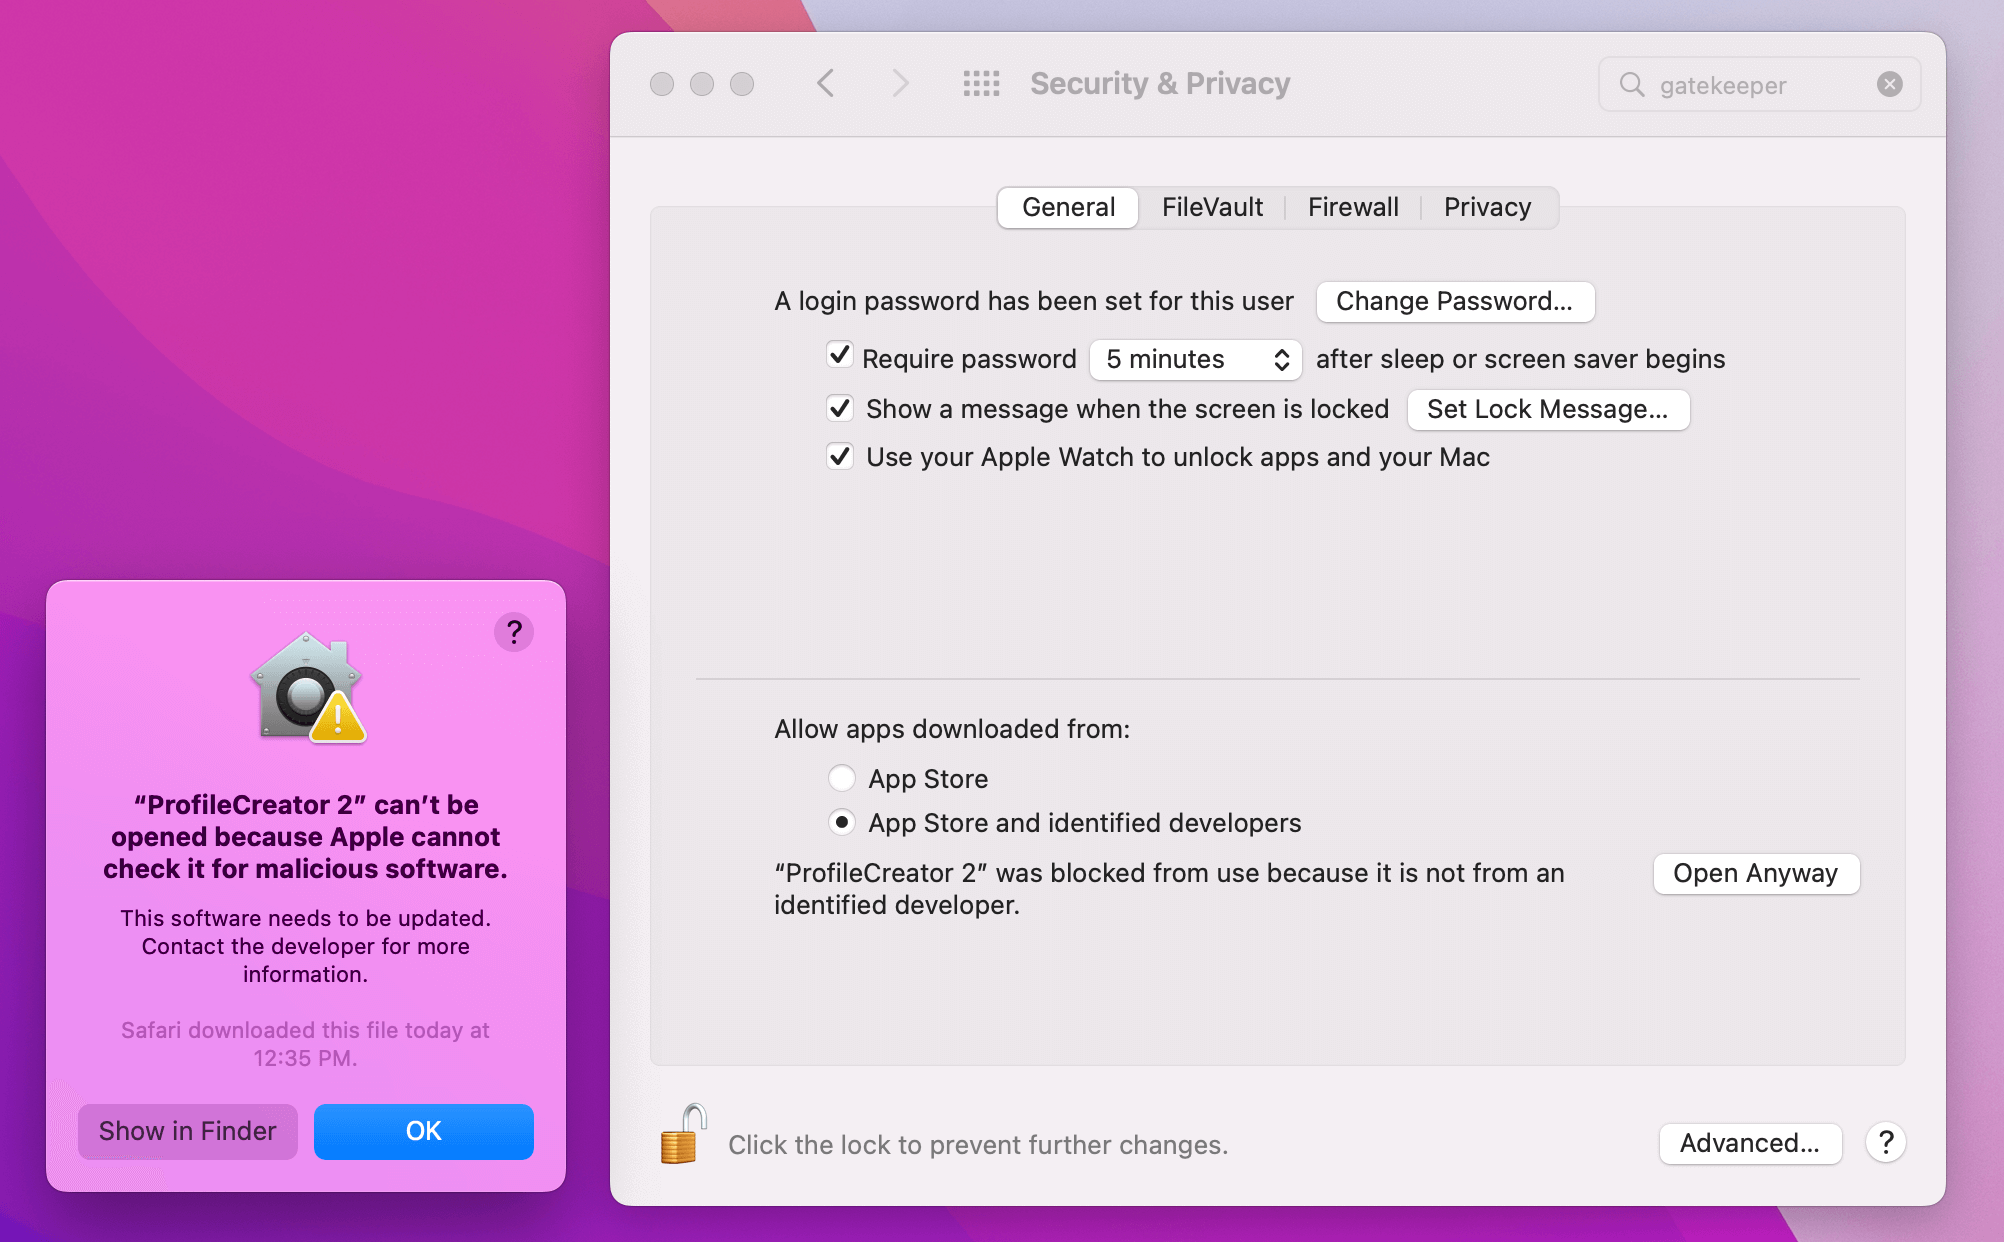 A screenshot of macOS Gatekeeper when on the security and privacy settings screen.